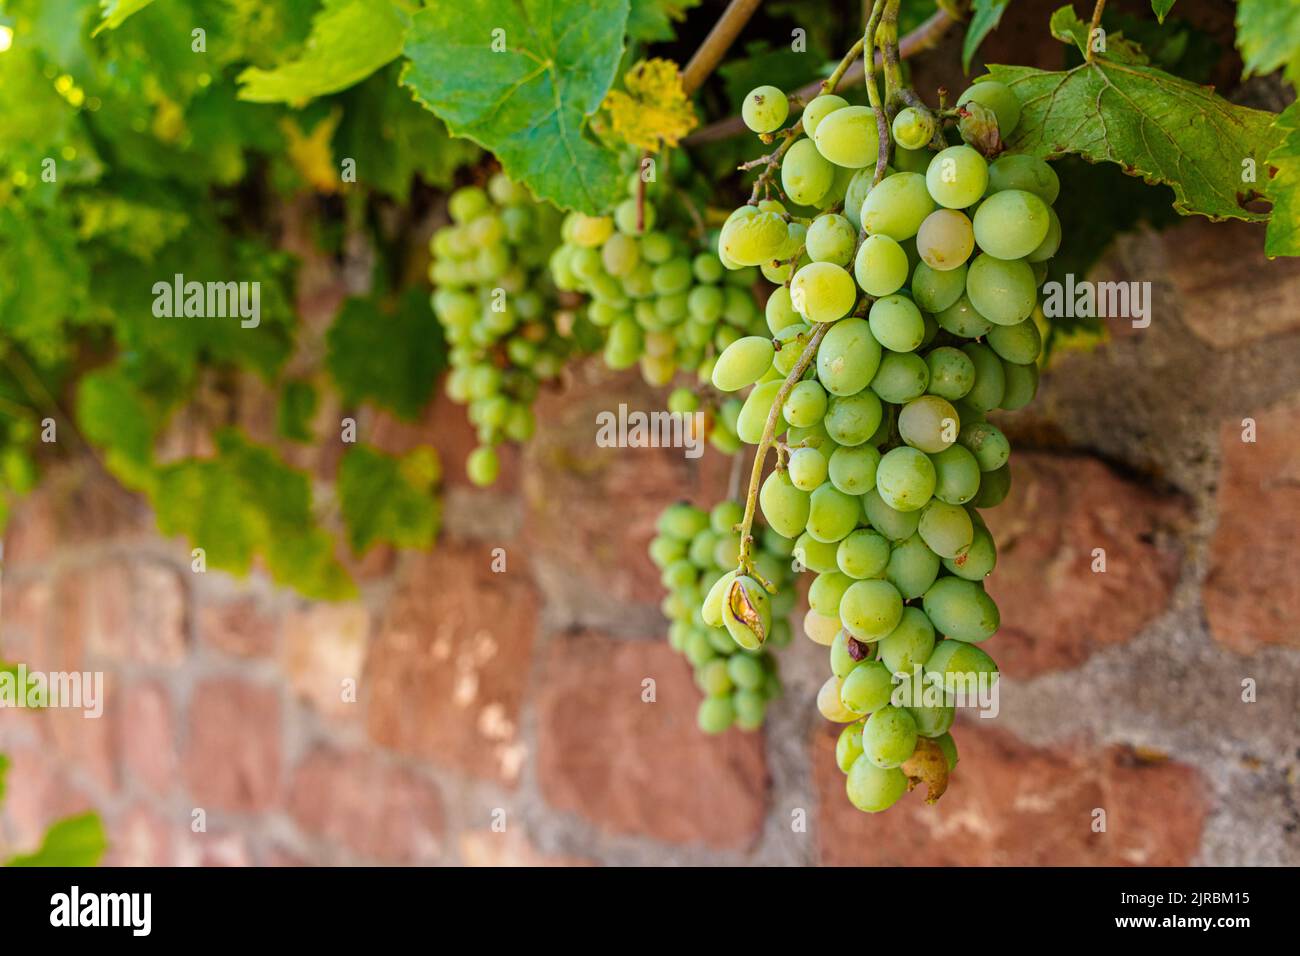 Close up of a vine, Vitis vinifera, growing on an old sandstone wall with ripe grapes at harvest time in autumn Stock Photo